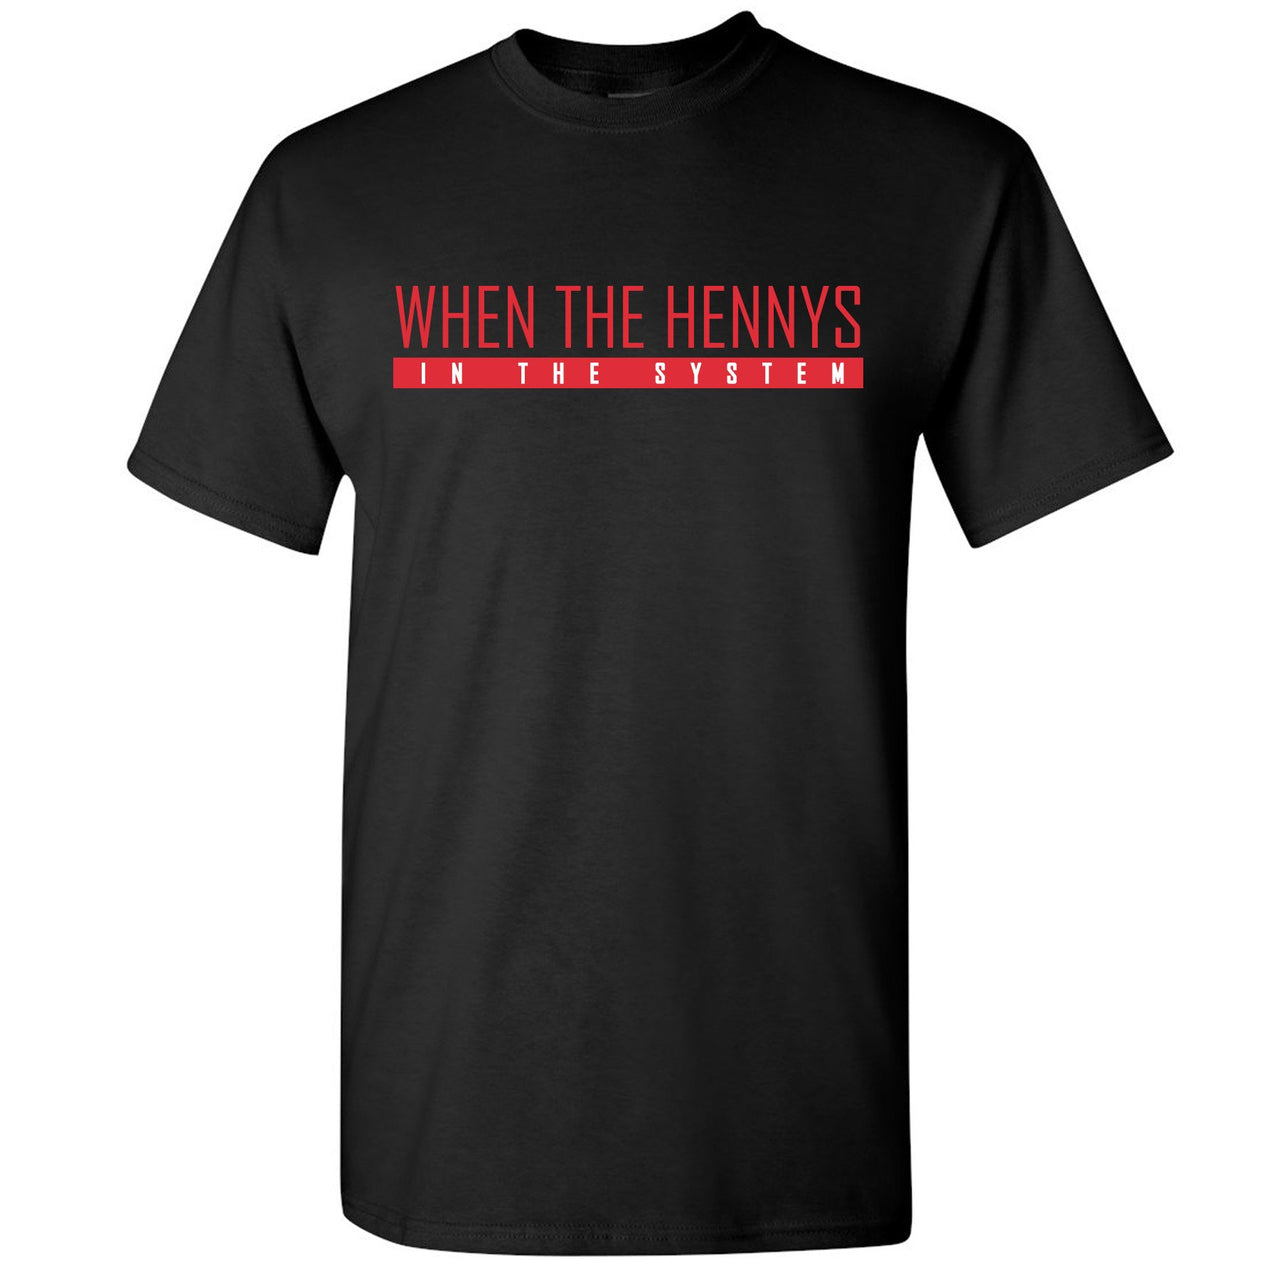 Bred 2019 4s T Shirt | When the Hennys, Black